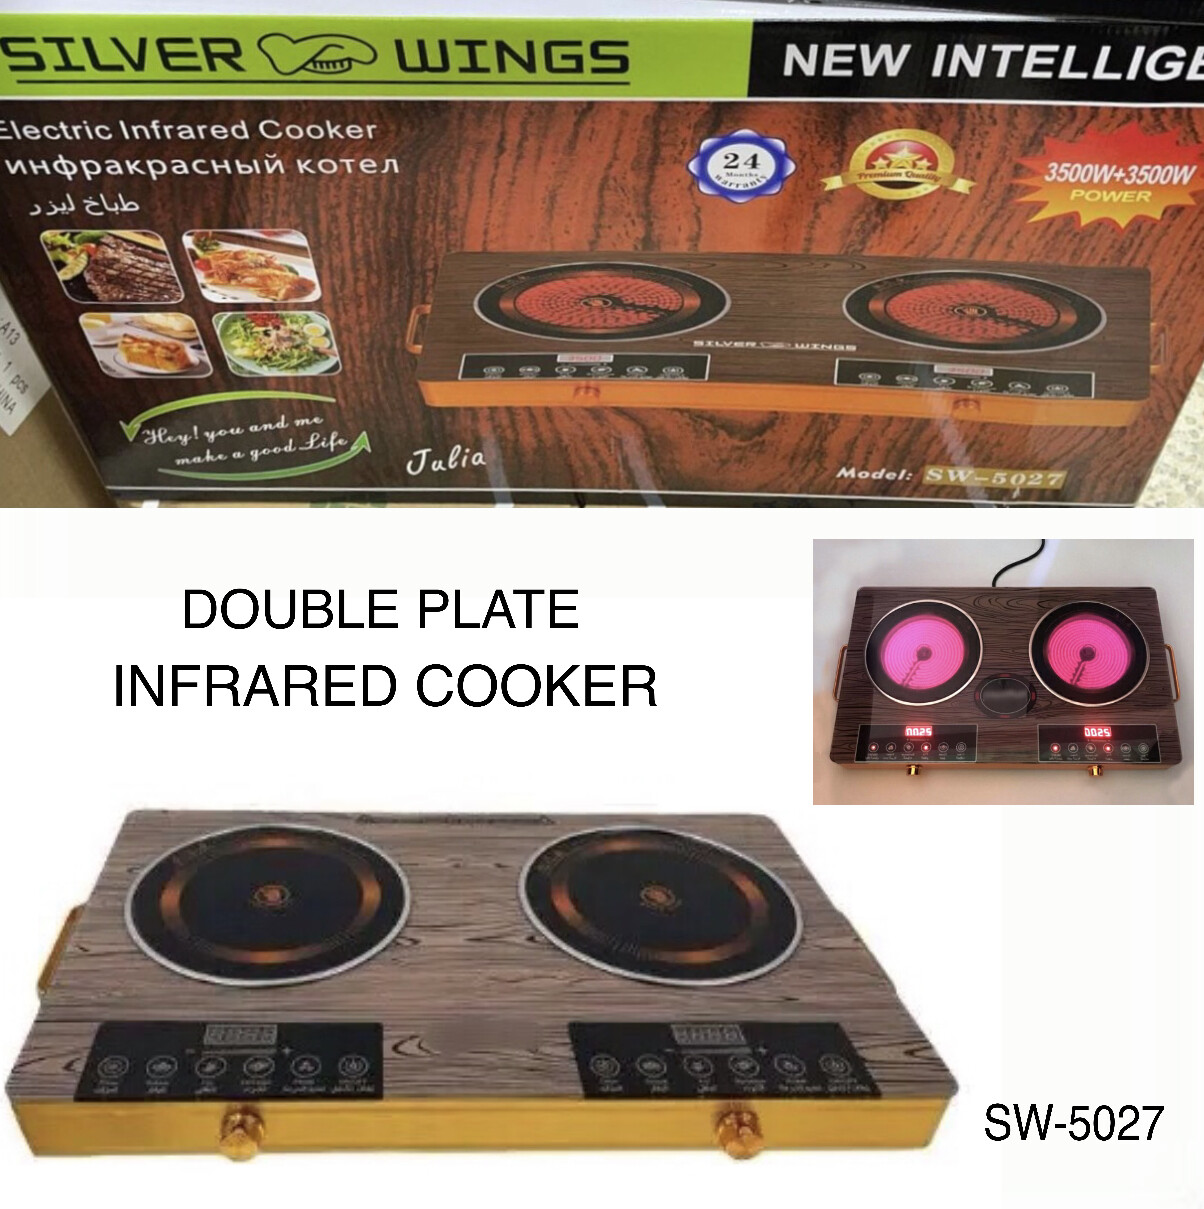 Double Infrared Cooker SW-5027